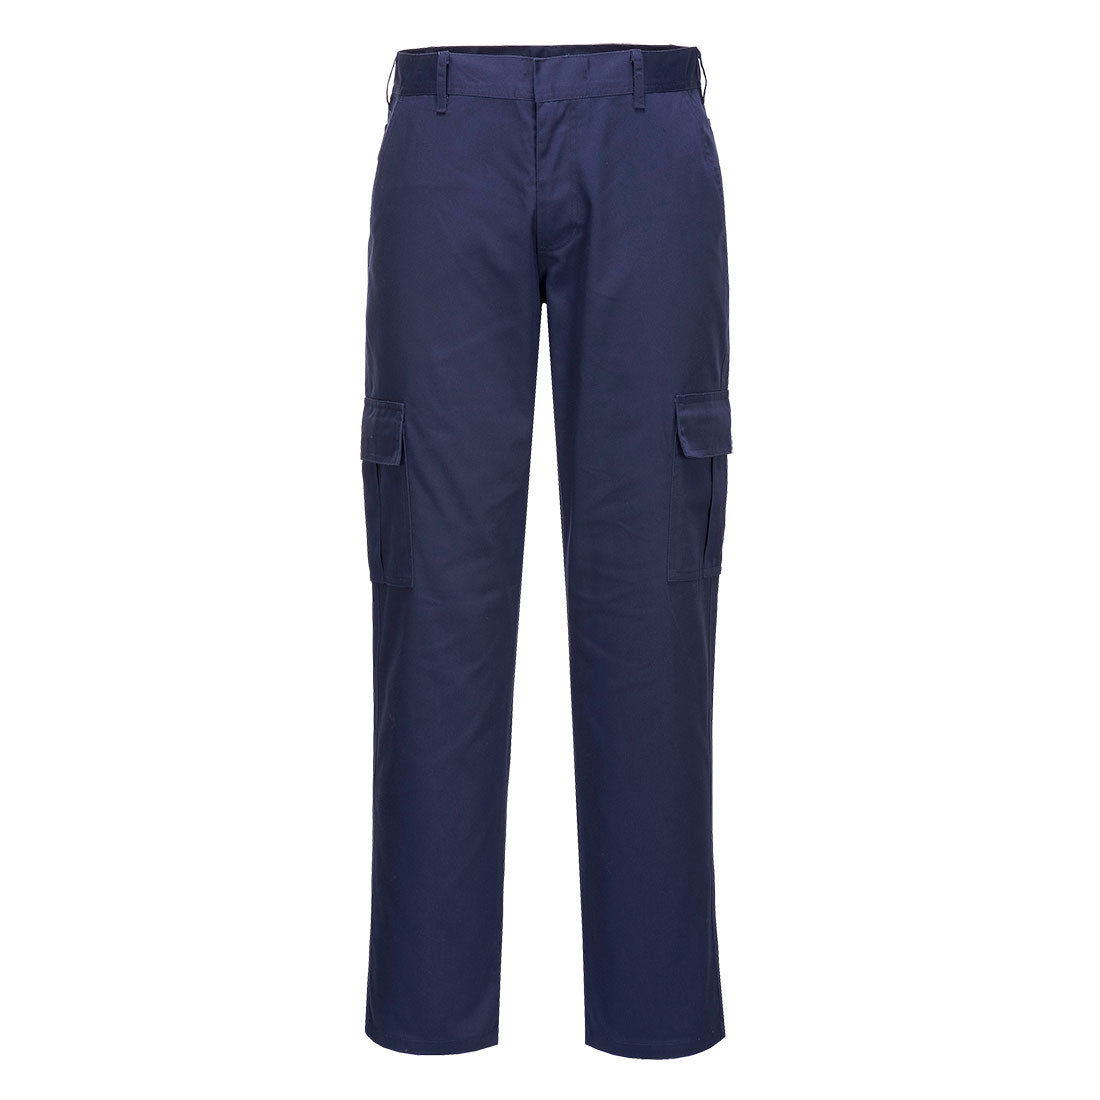 Portwest C711 Slim Fit Combat Trousers for General Workwear